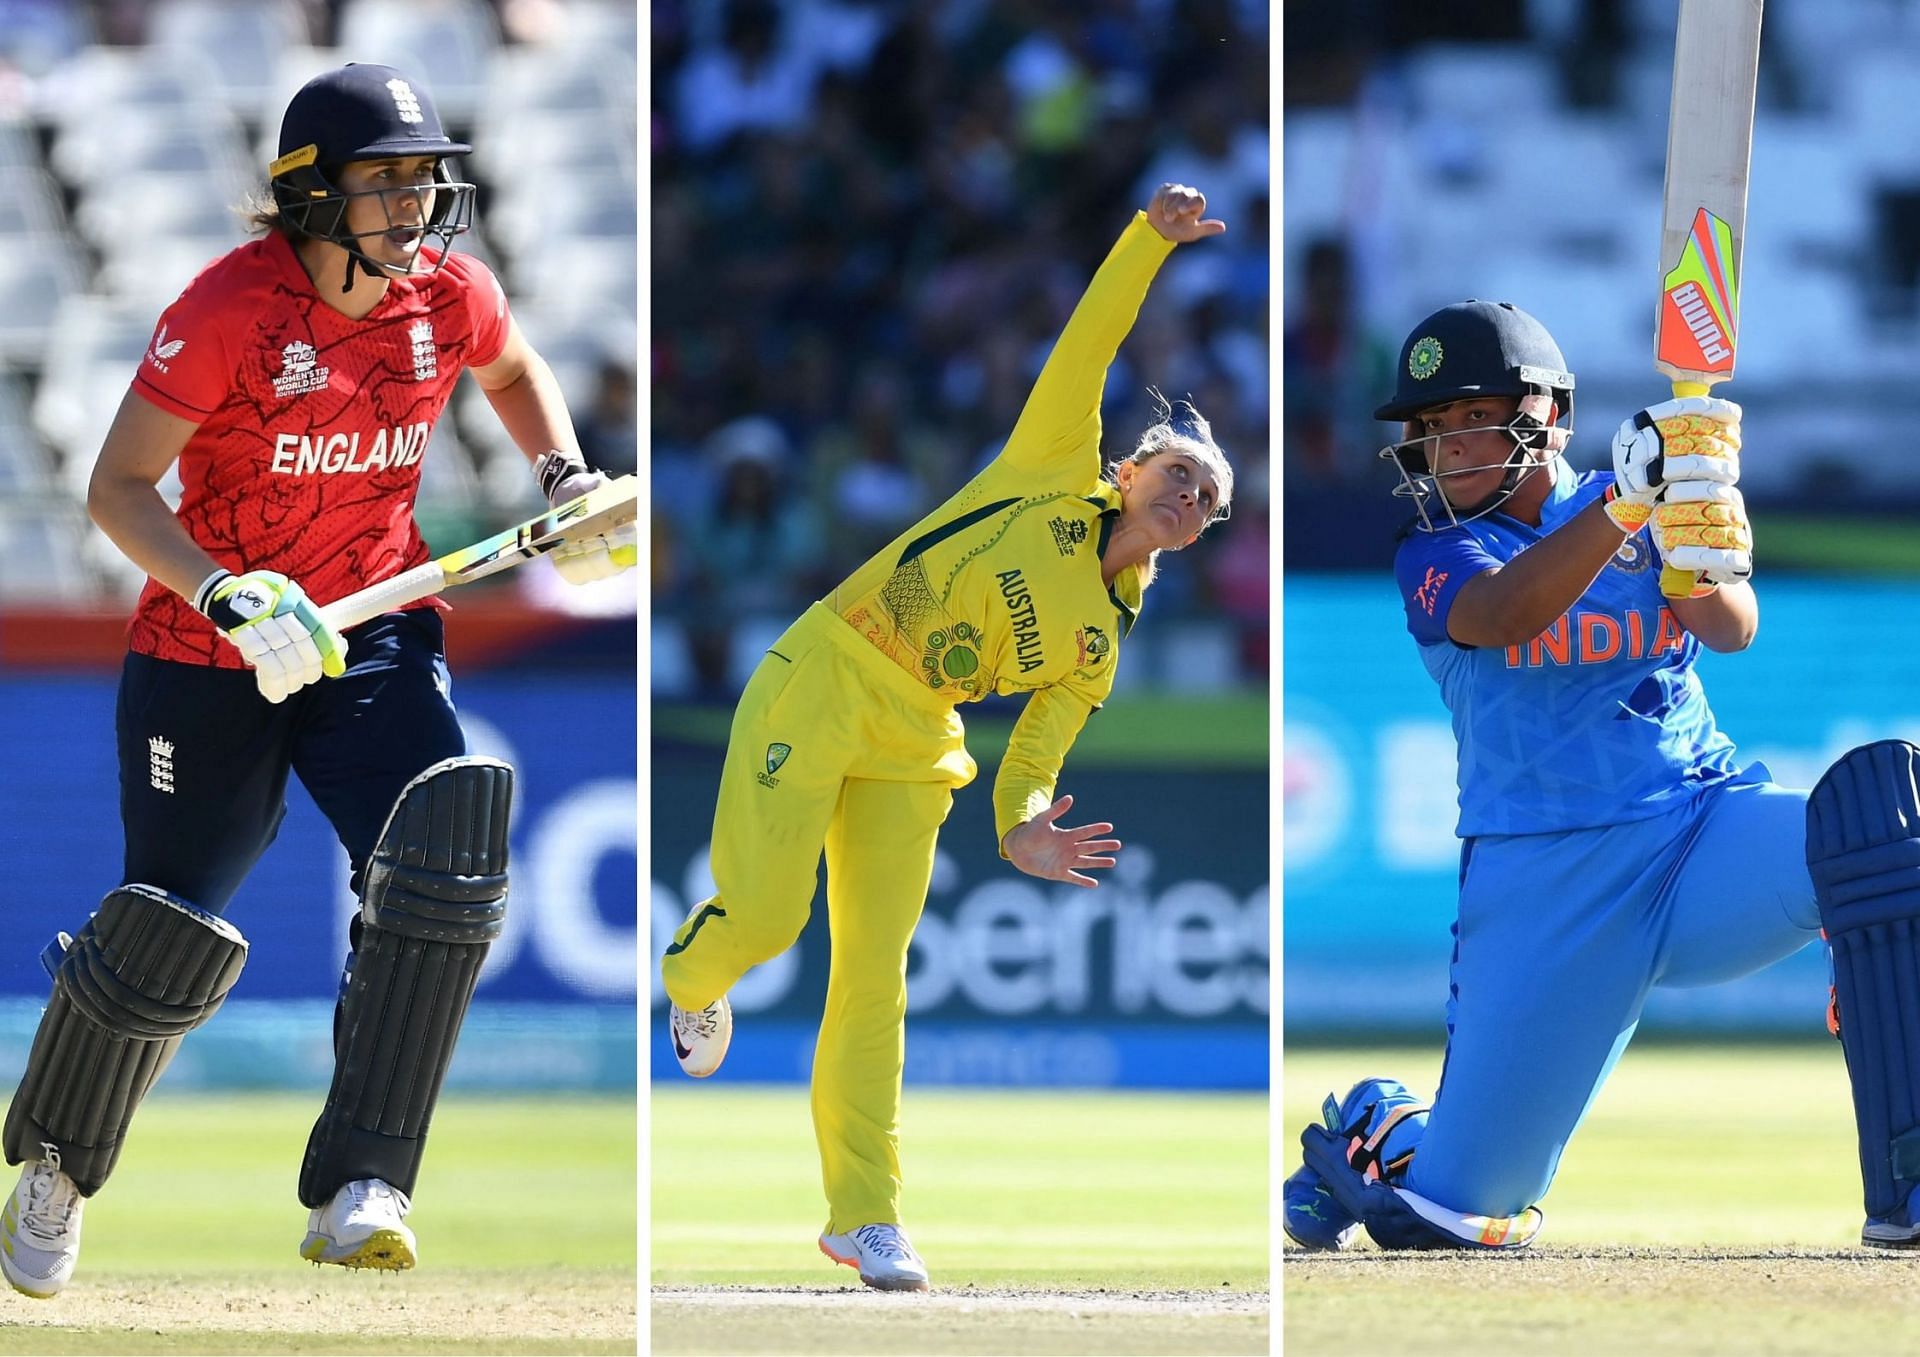 Who were the ones who stood out at the ICC Women